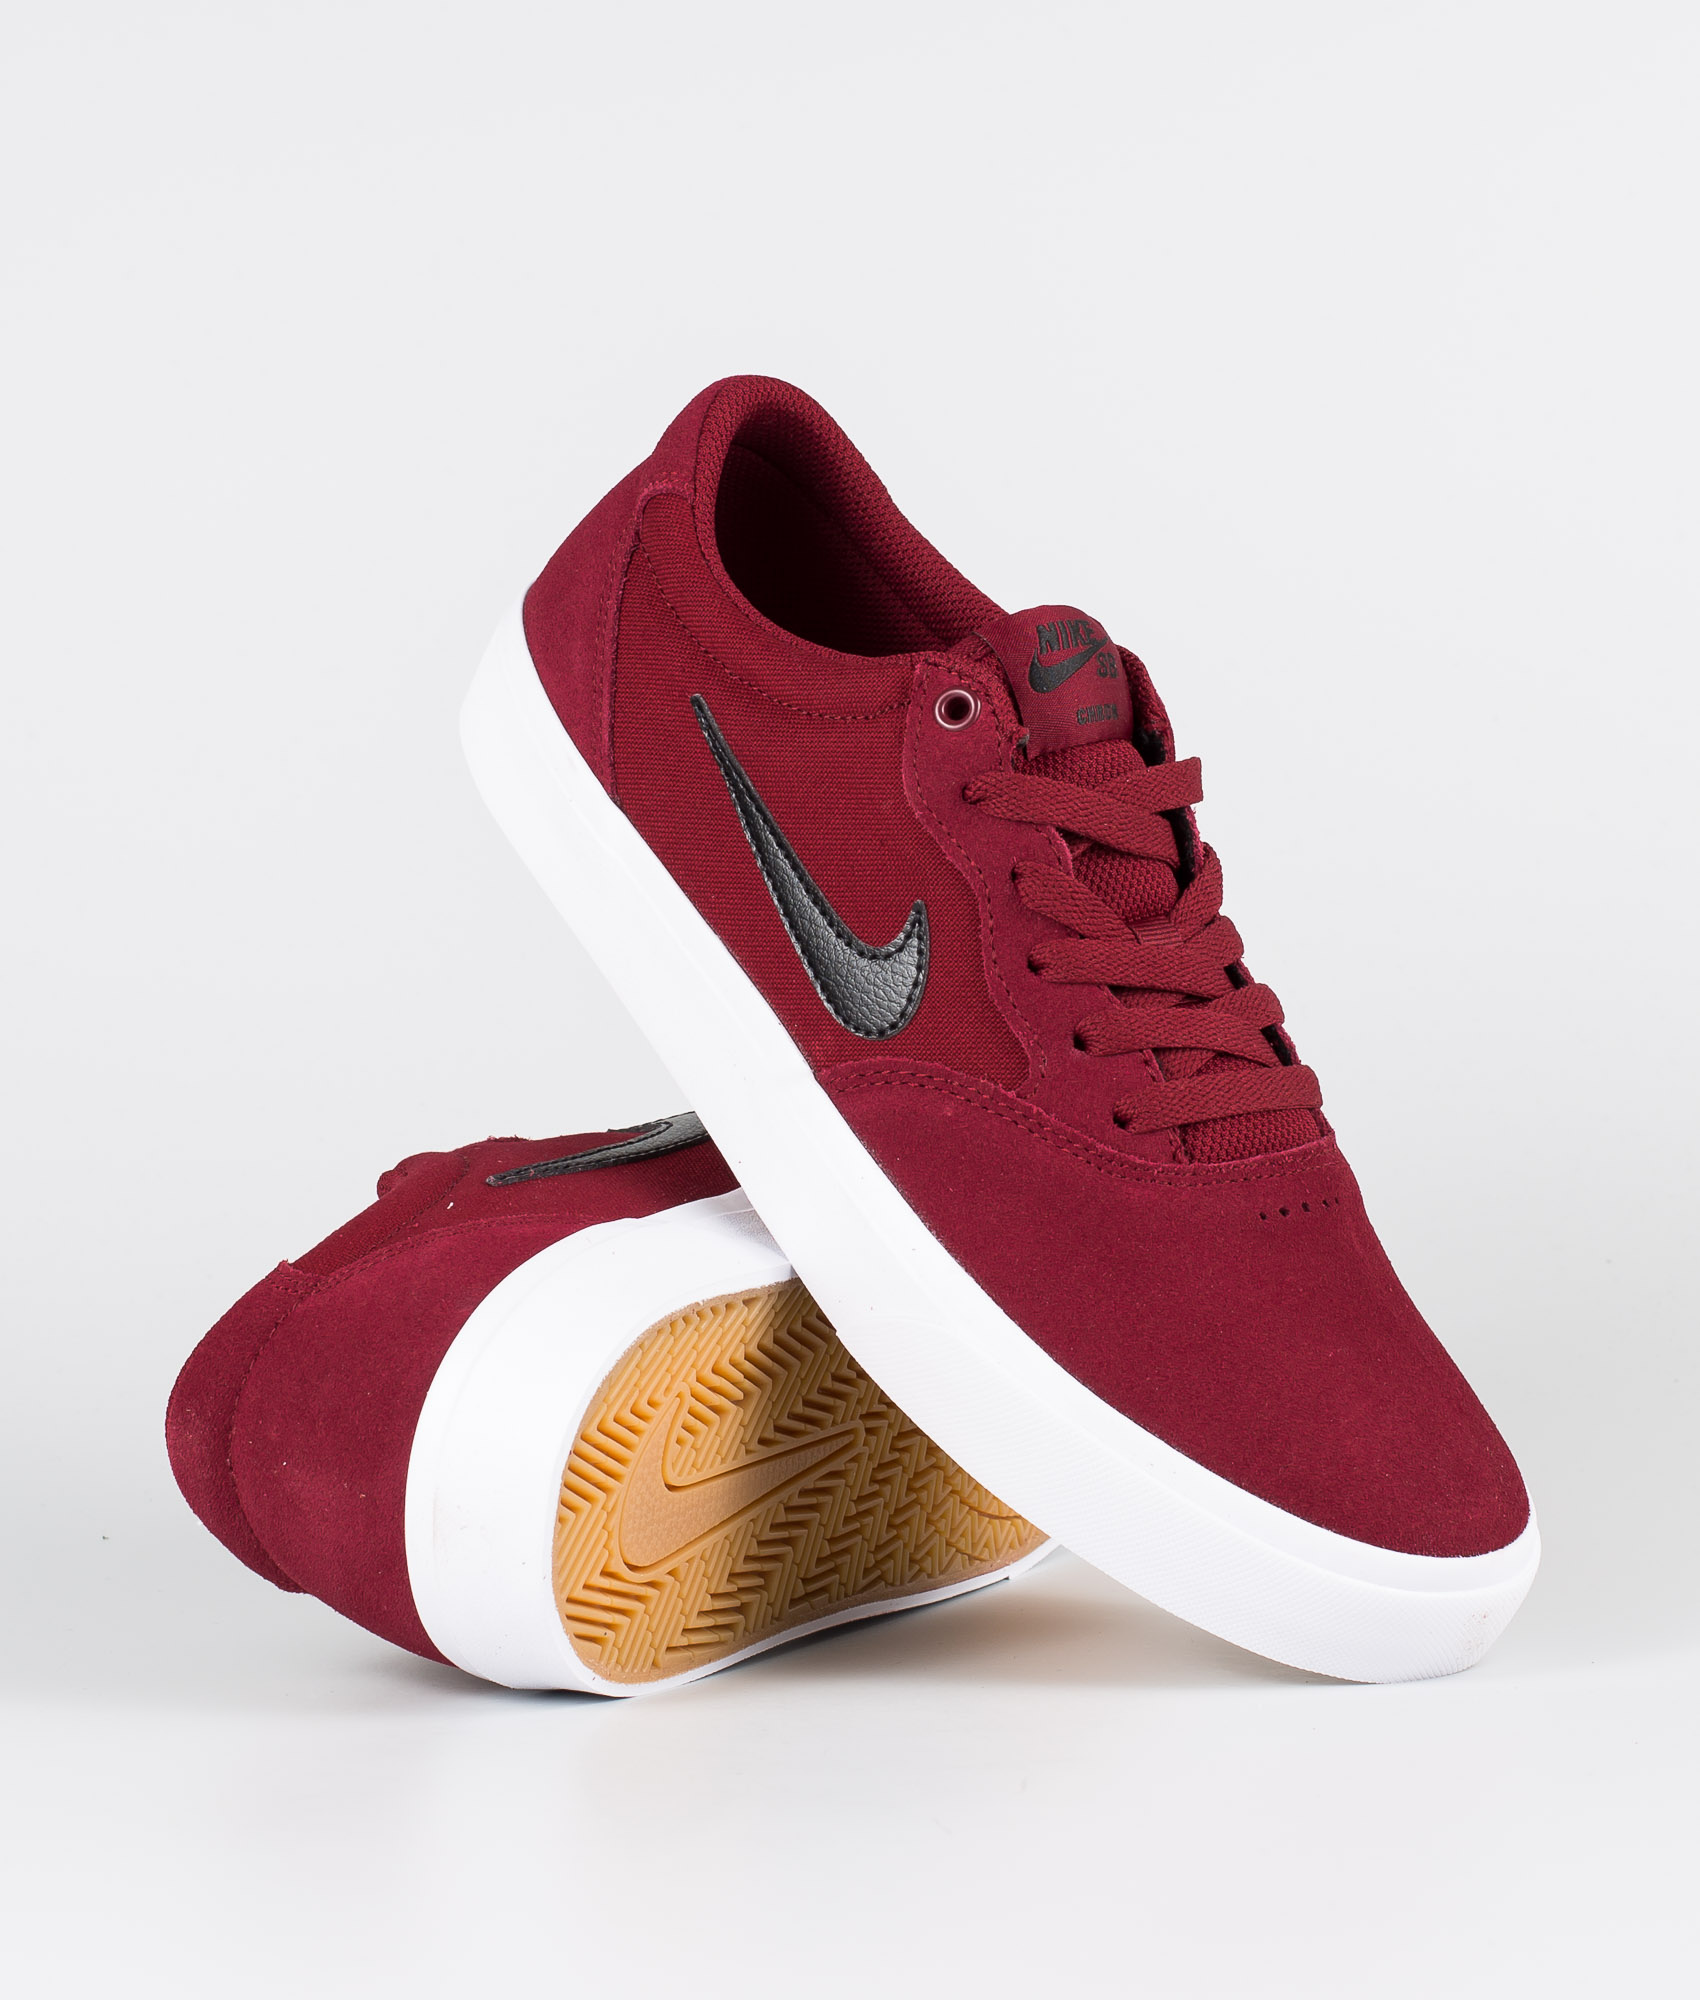 shoes nike red